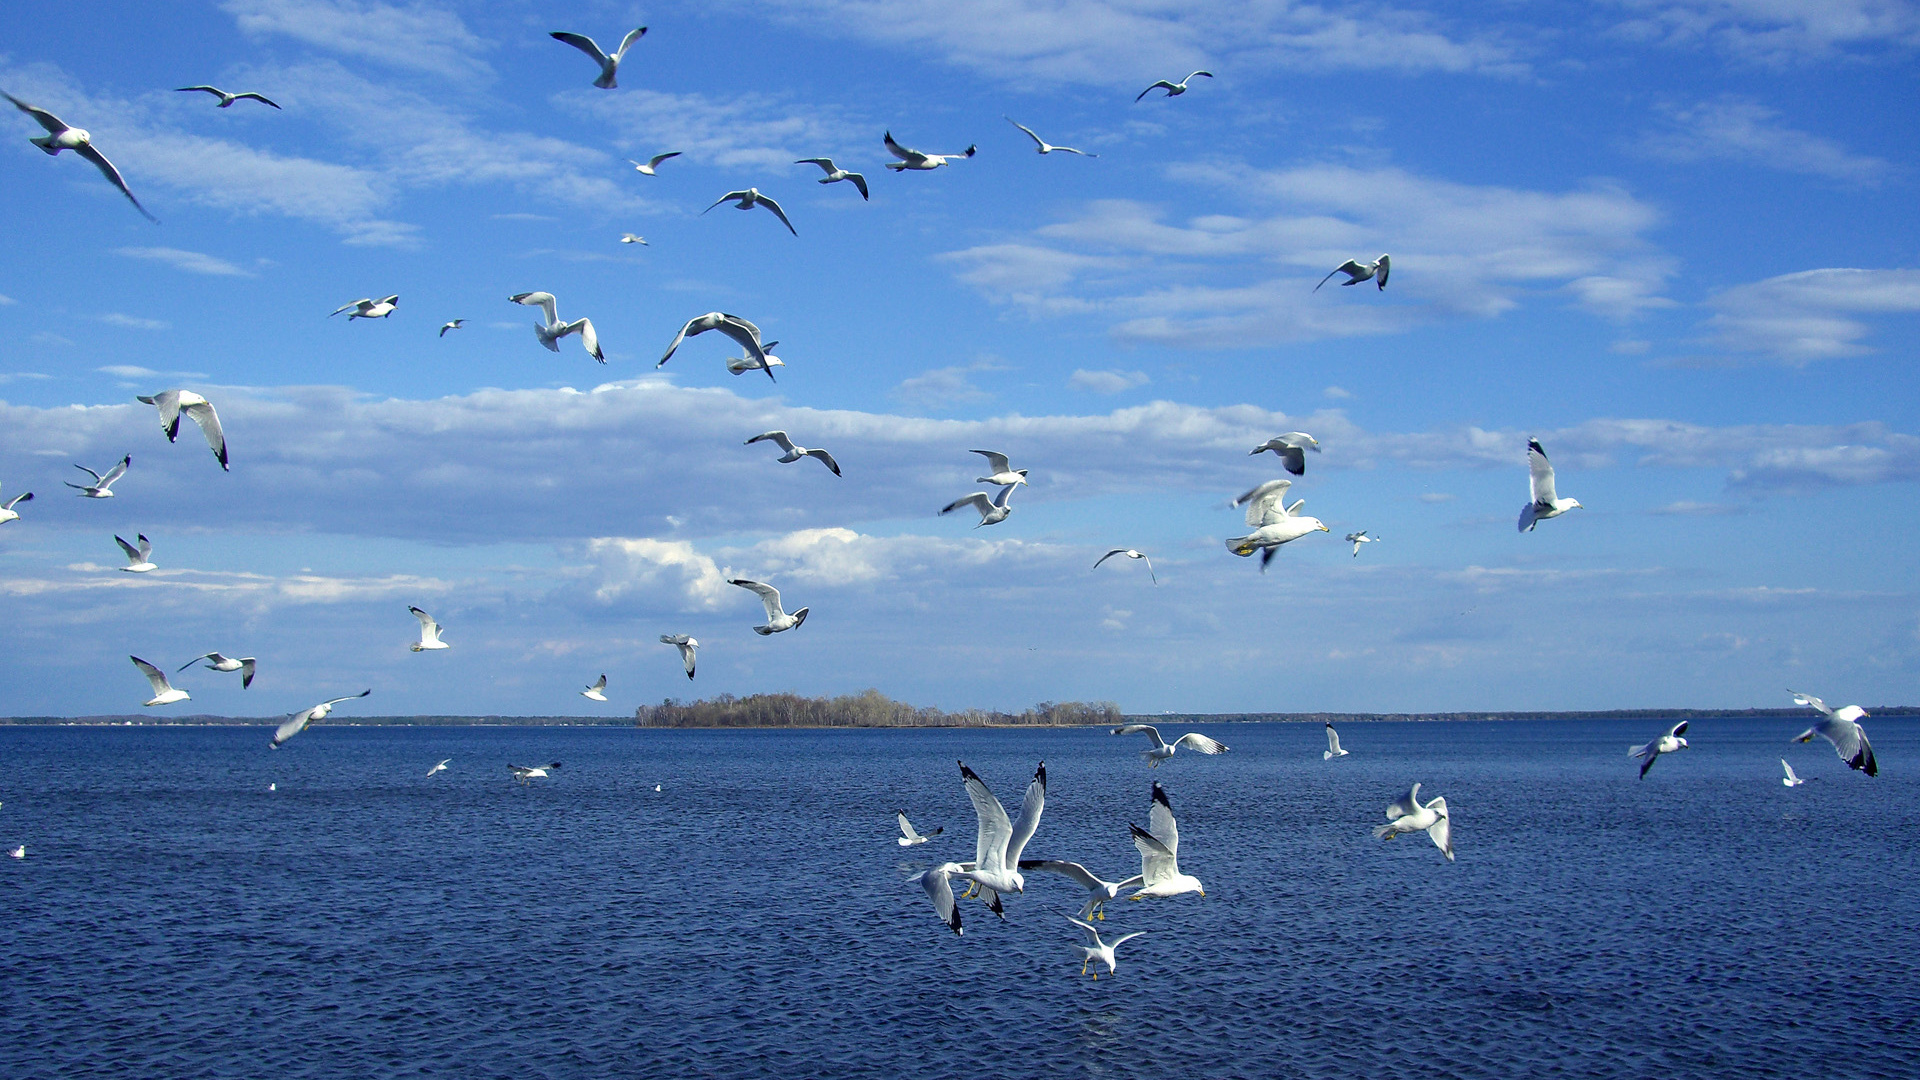 Flock Of Seagulls Over The Sea Wallpaper And Image